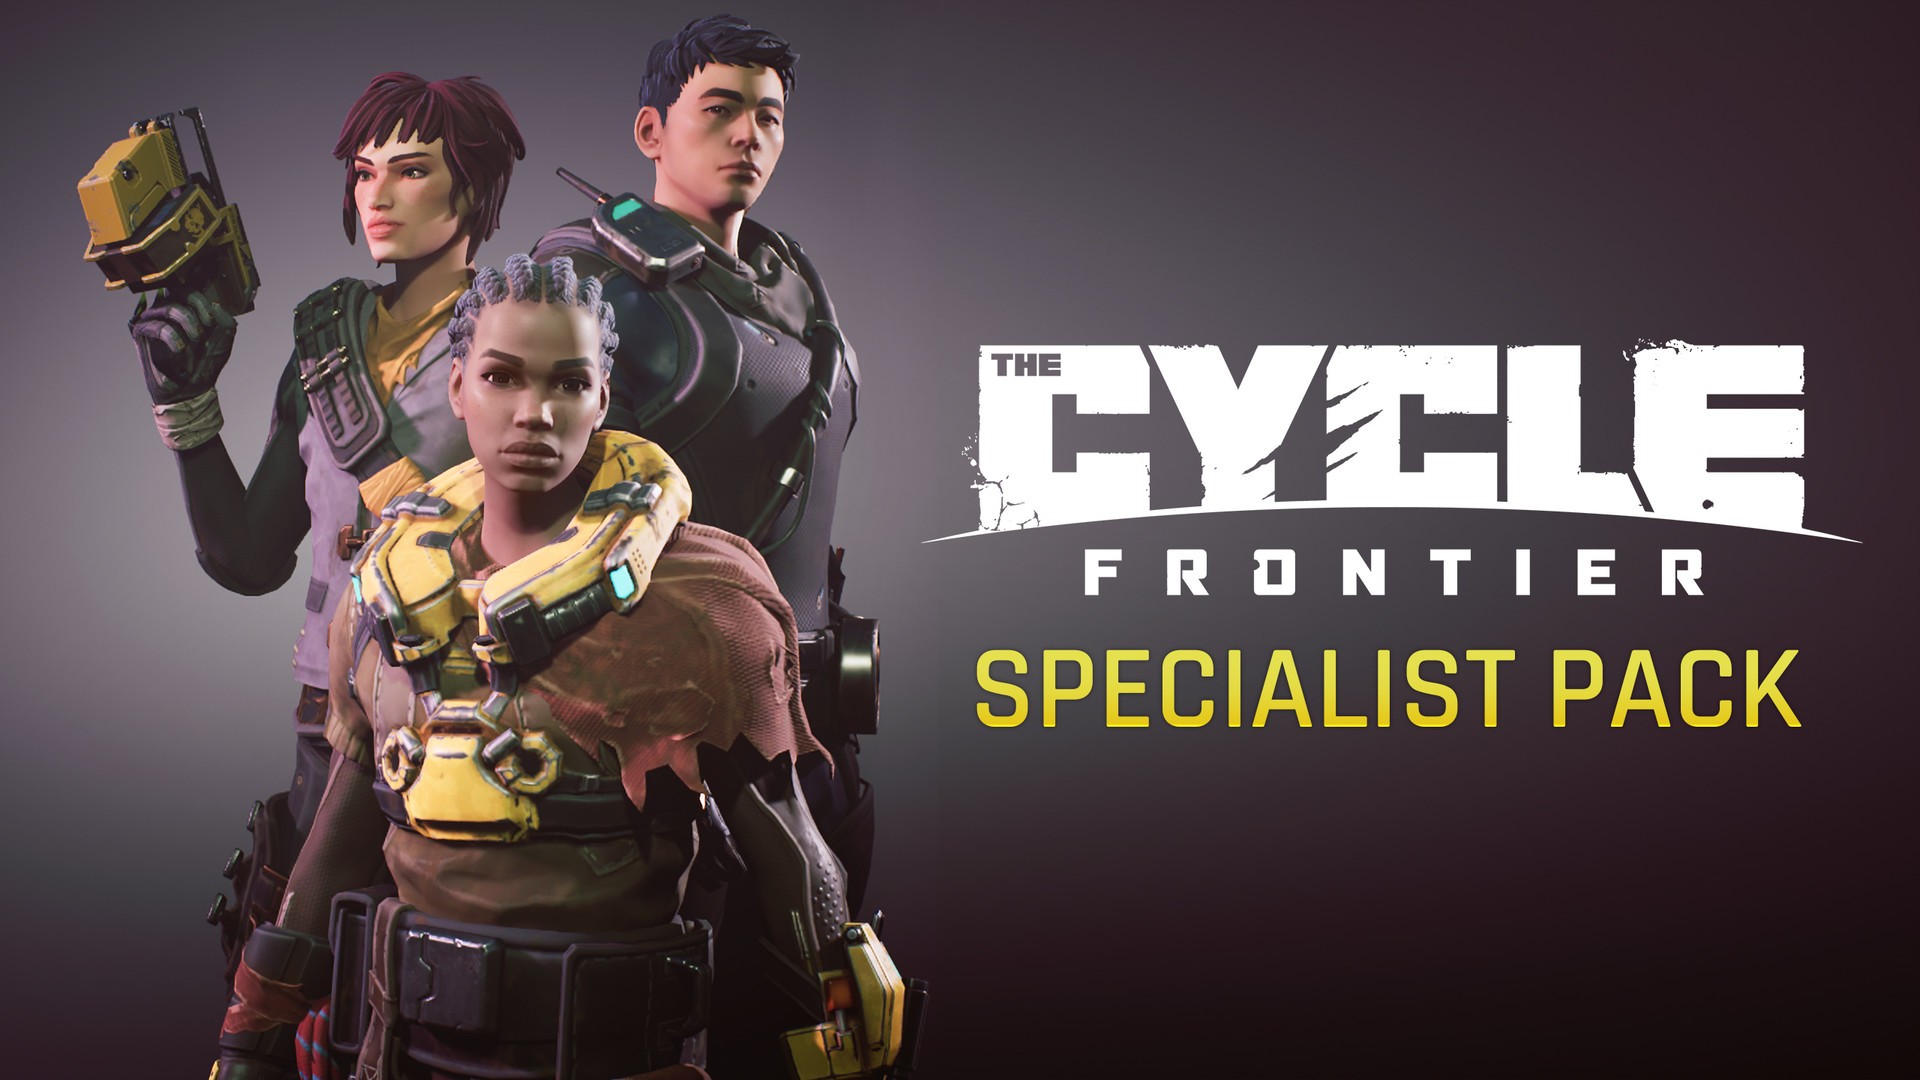 The Cycle: Frontier - Specialist Pack DLC Steam CD Key 5.64 $